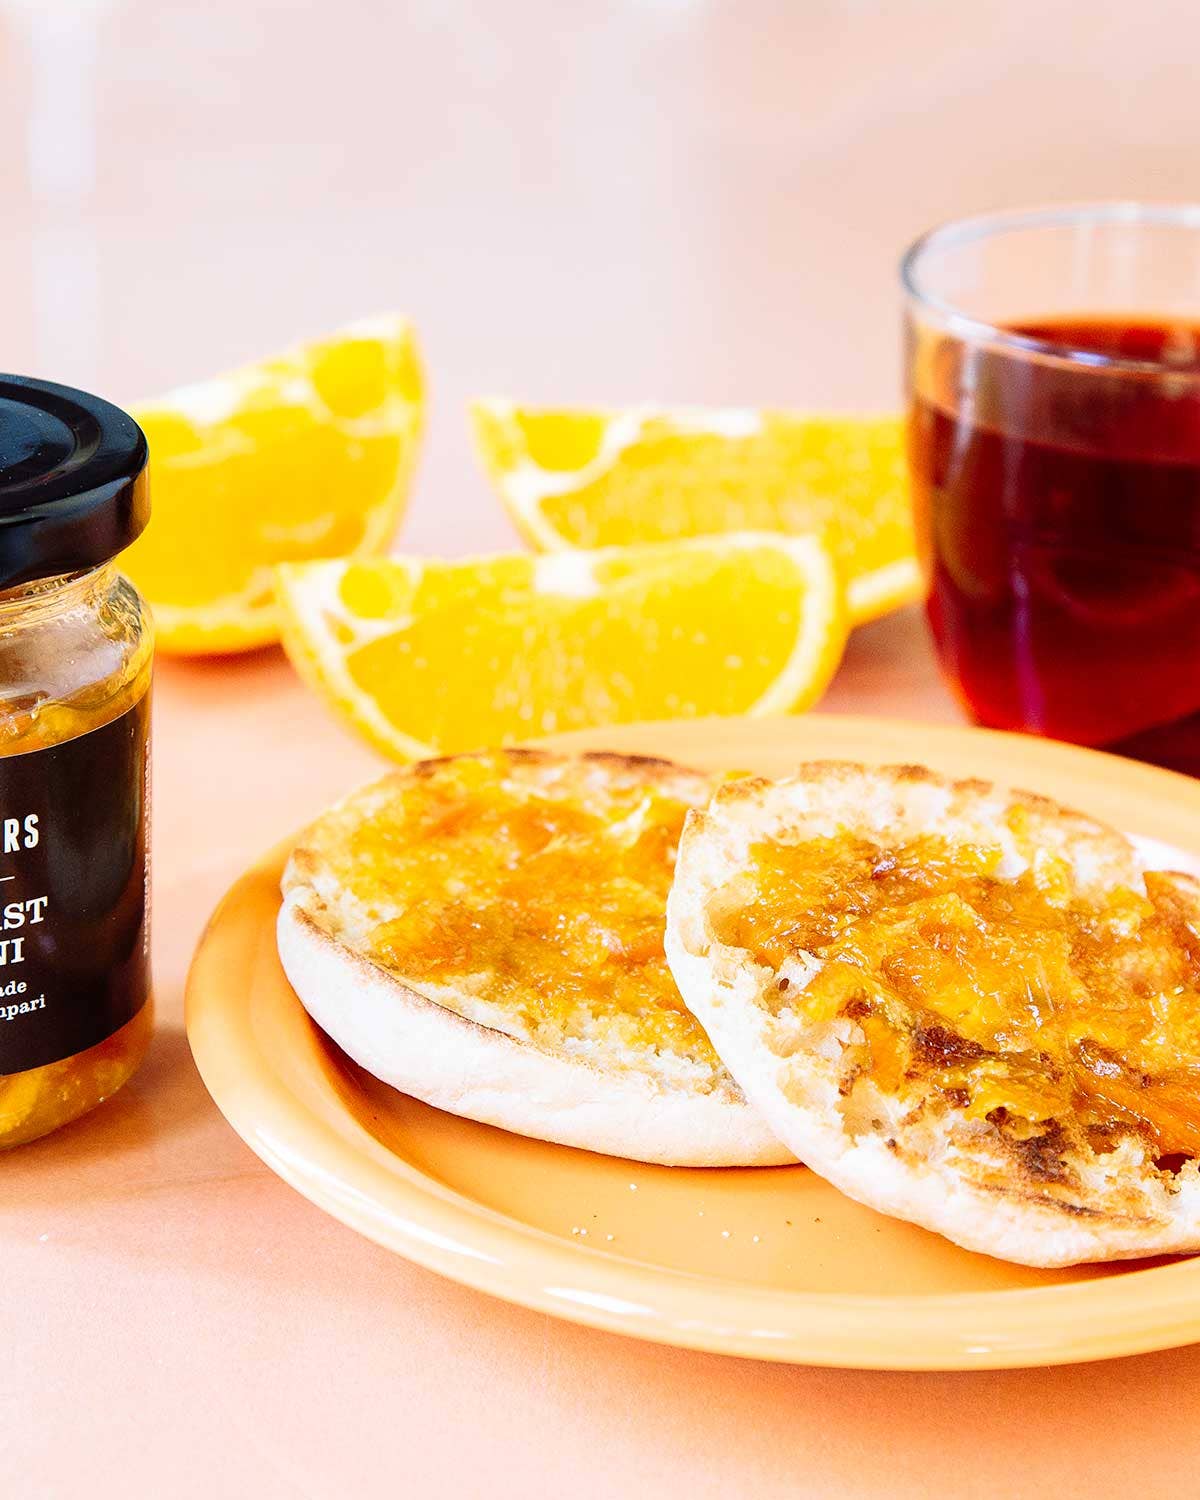 This Marmalade is a Boozy Morning Spread for the Cocktail-Obsessed